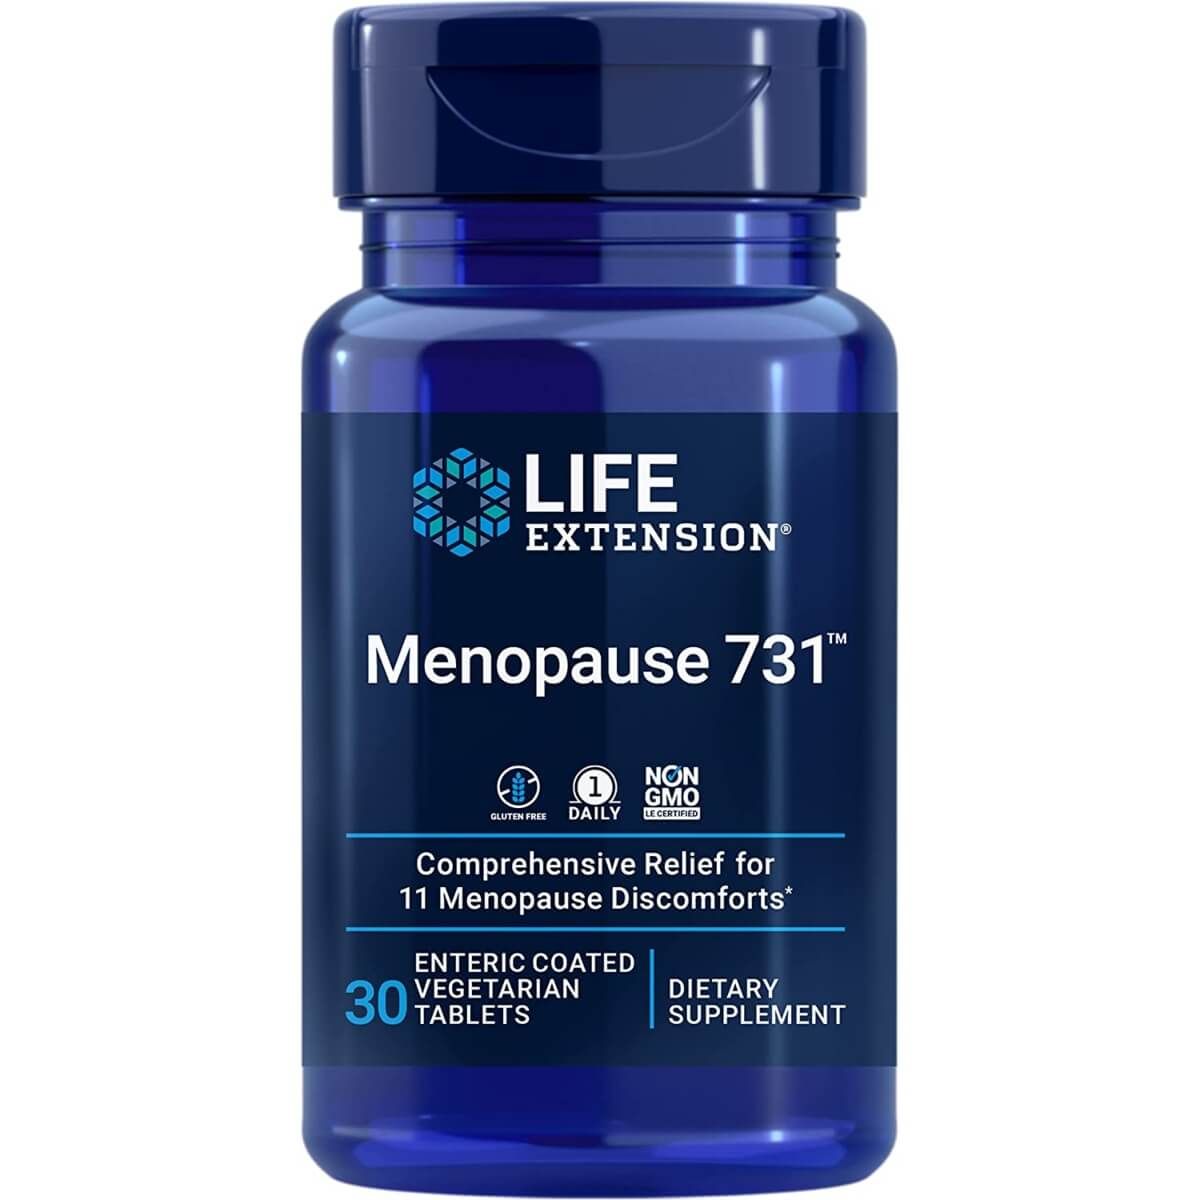 Photos - Vitamins & Minerals Life Extension Menopause 731, 30 Enteric-Coated Vegetarian Tablets PBW-P36 